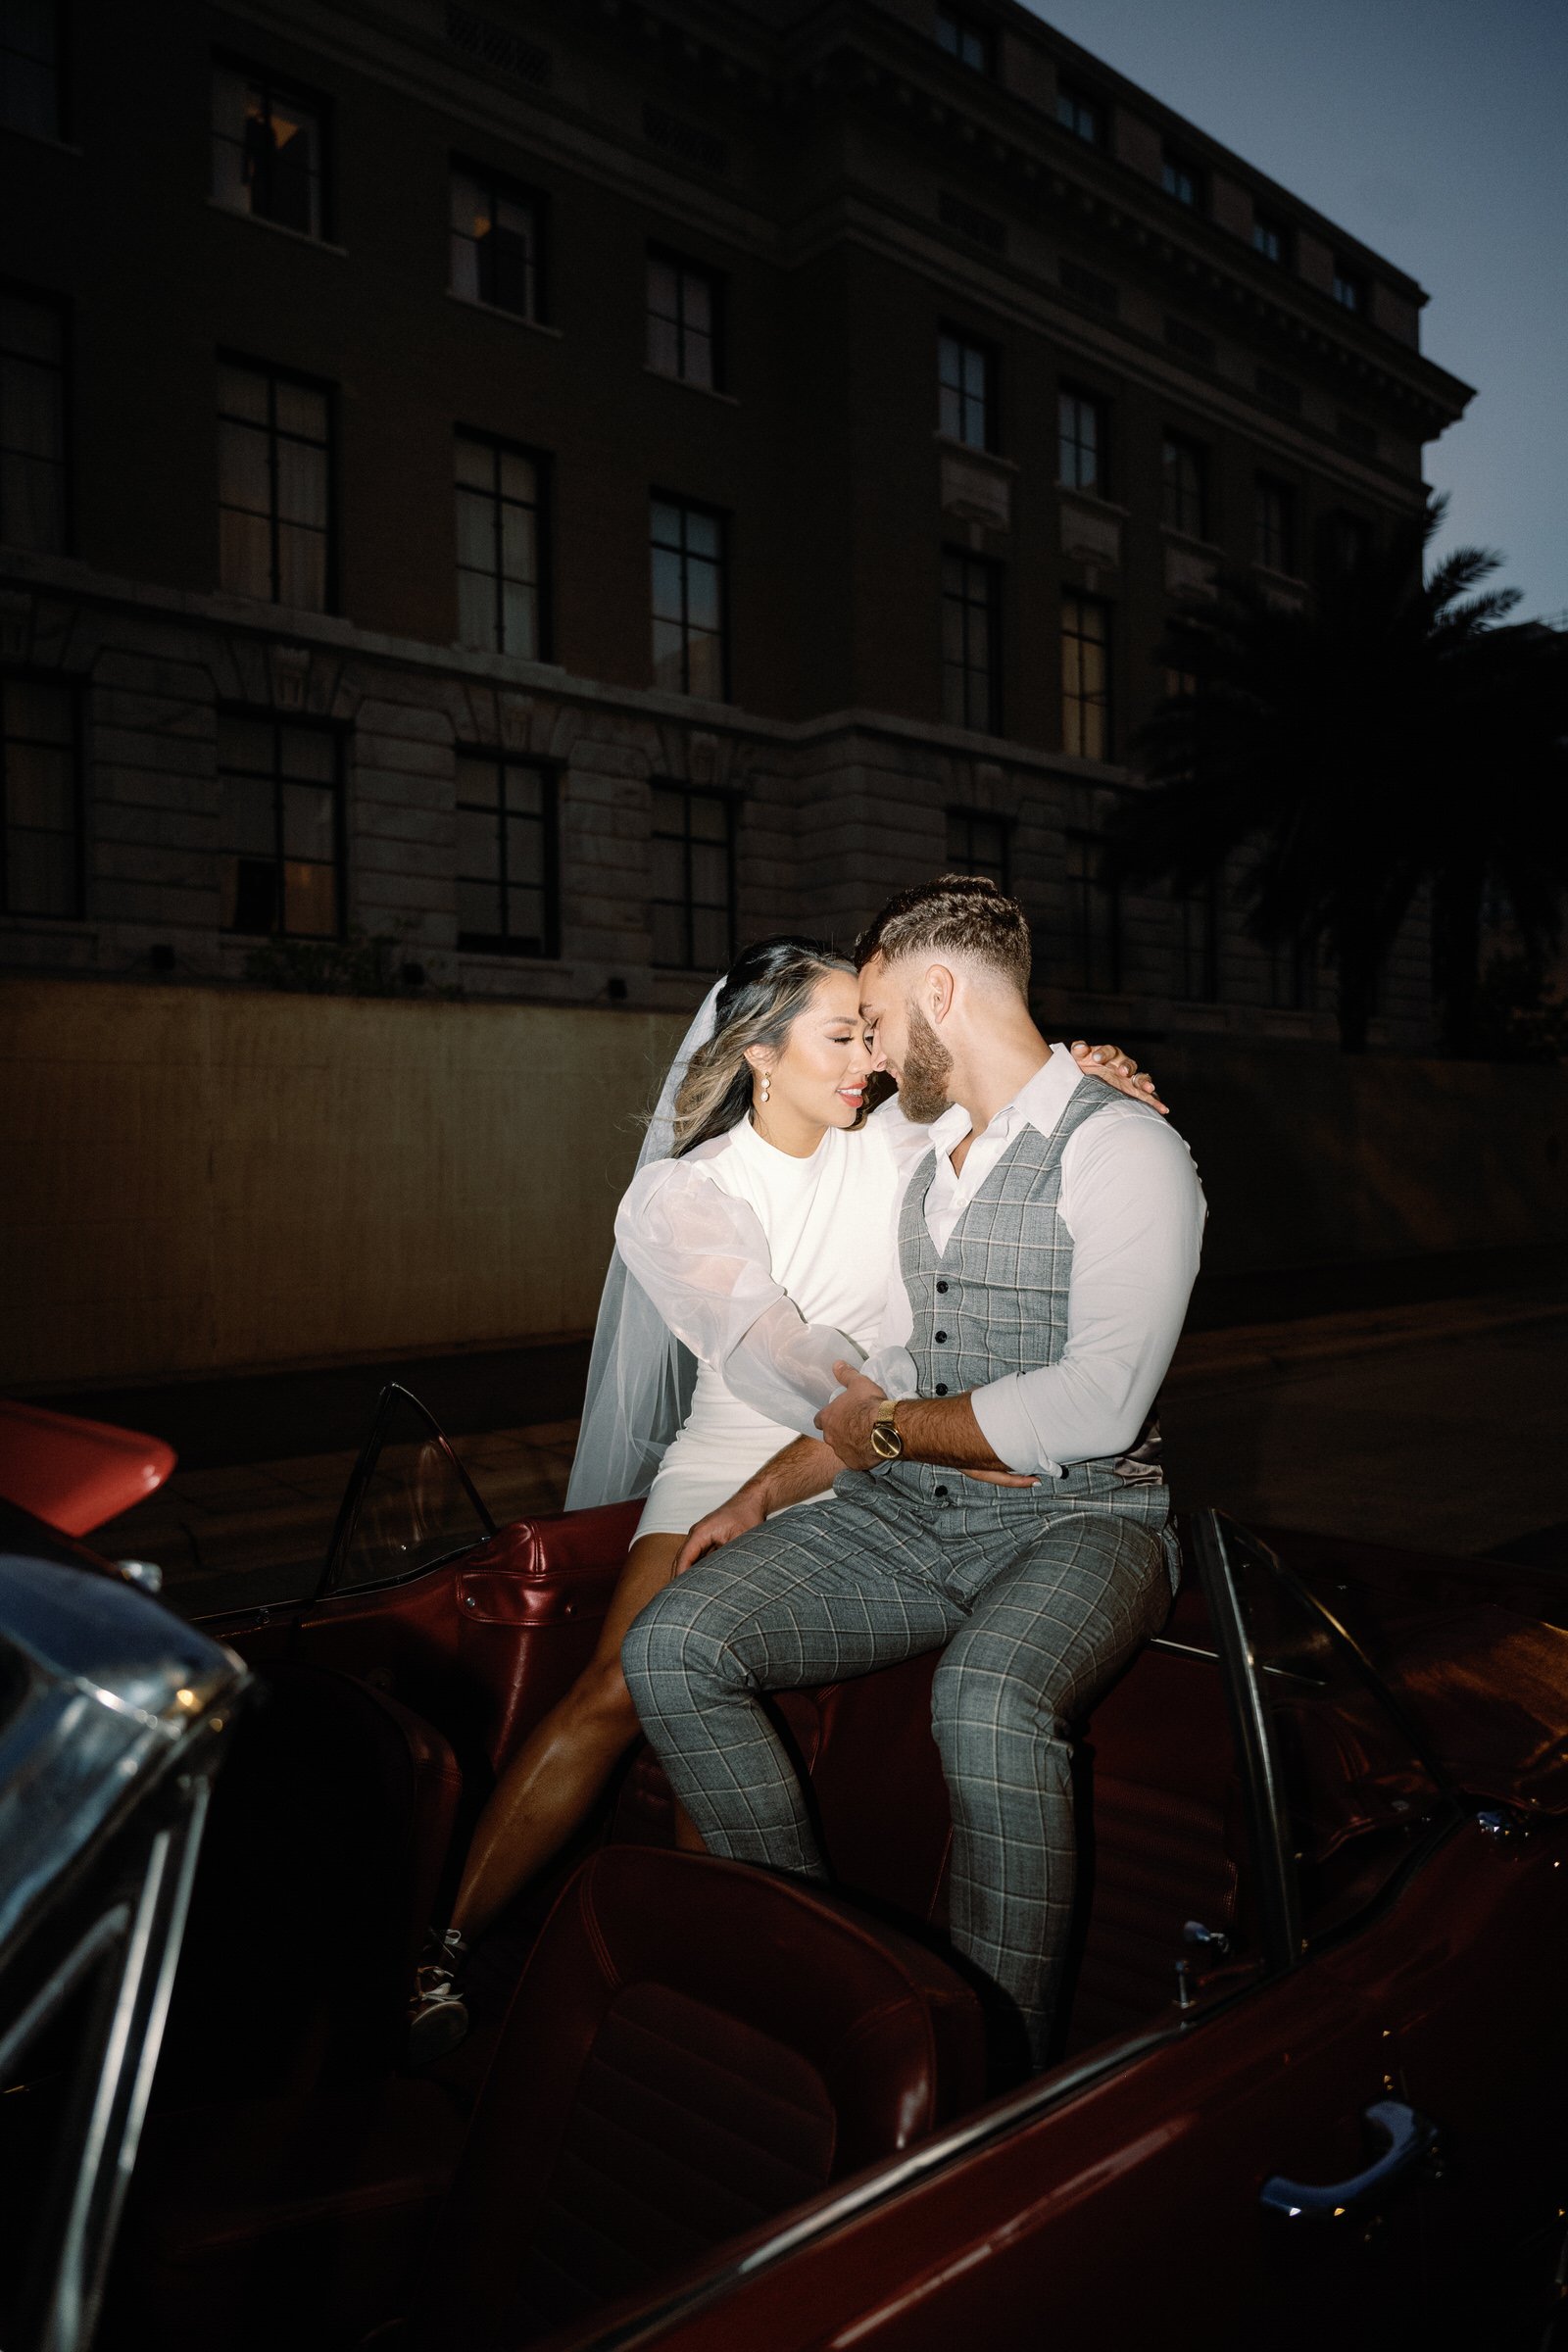 Copyright-Dewitt-for-Love-Photography-M-M-Ybor-City-Tampa-Engagement-Session-106.jpg